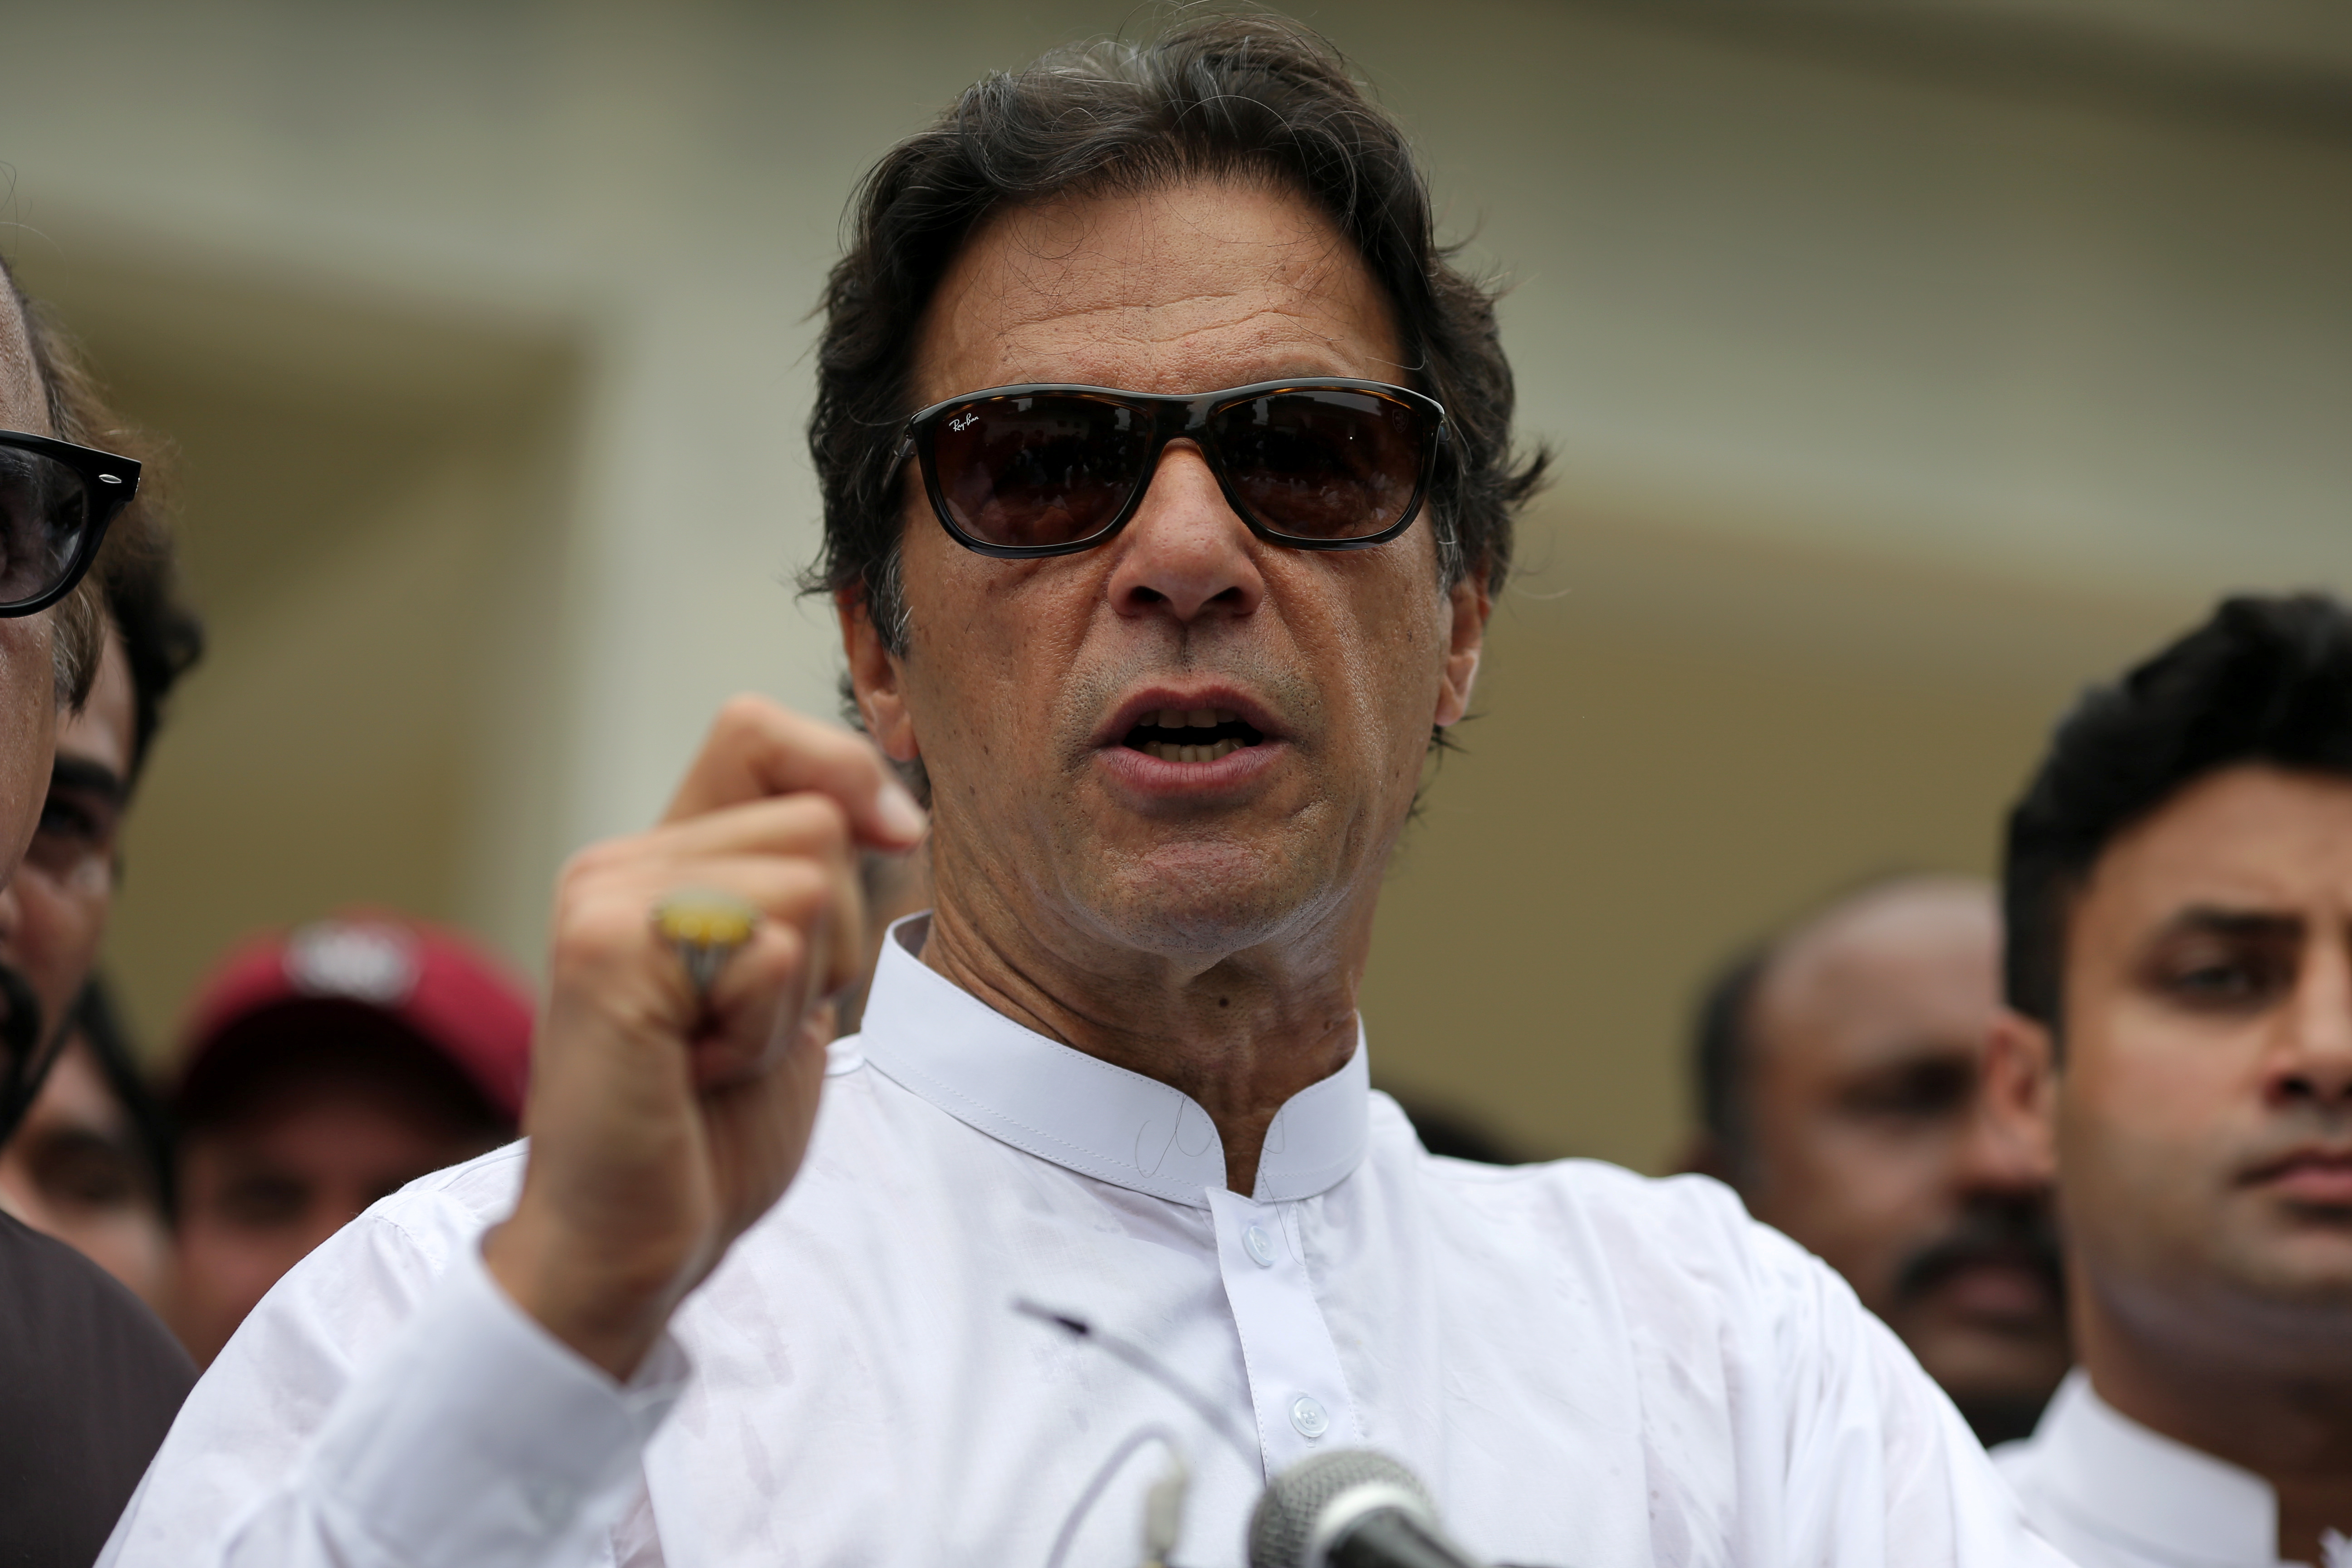 Cricket star-turned-politician Imran Khan, chairman of Pakistan Tehreek-e-Insaf (PTI), speaks to members of media after casting his vote at a polling station during the general election in Islamabad